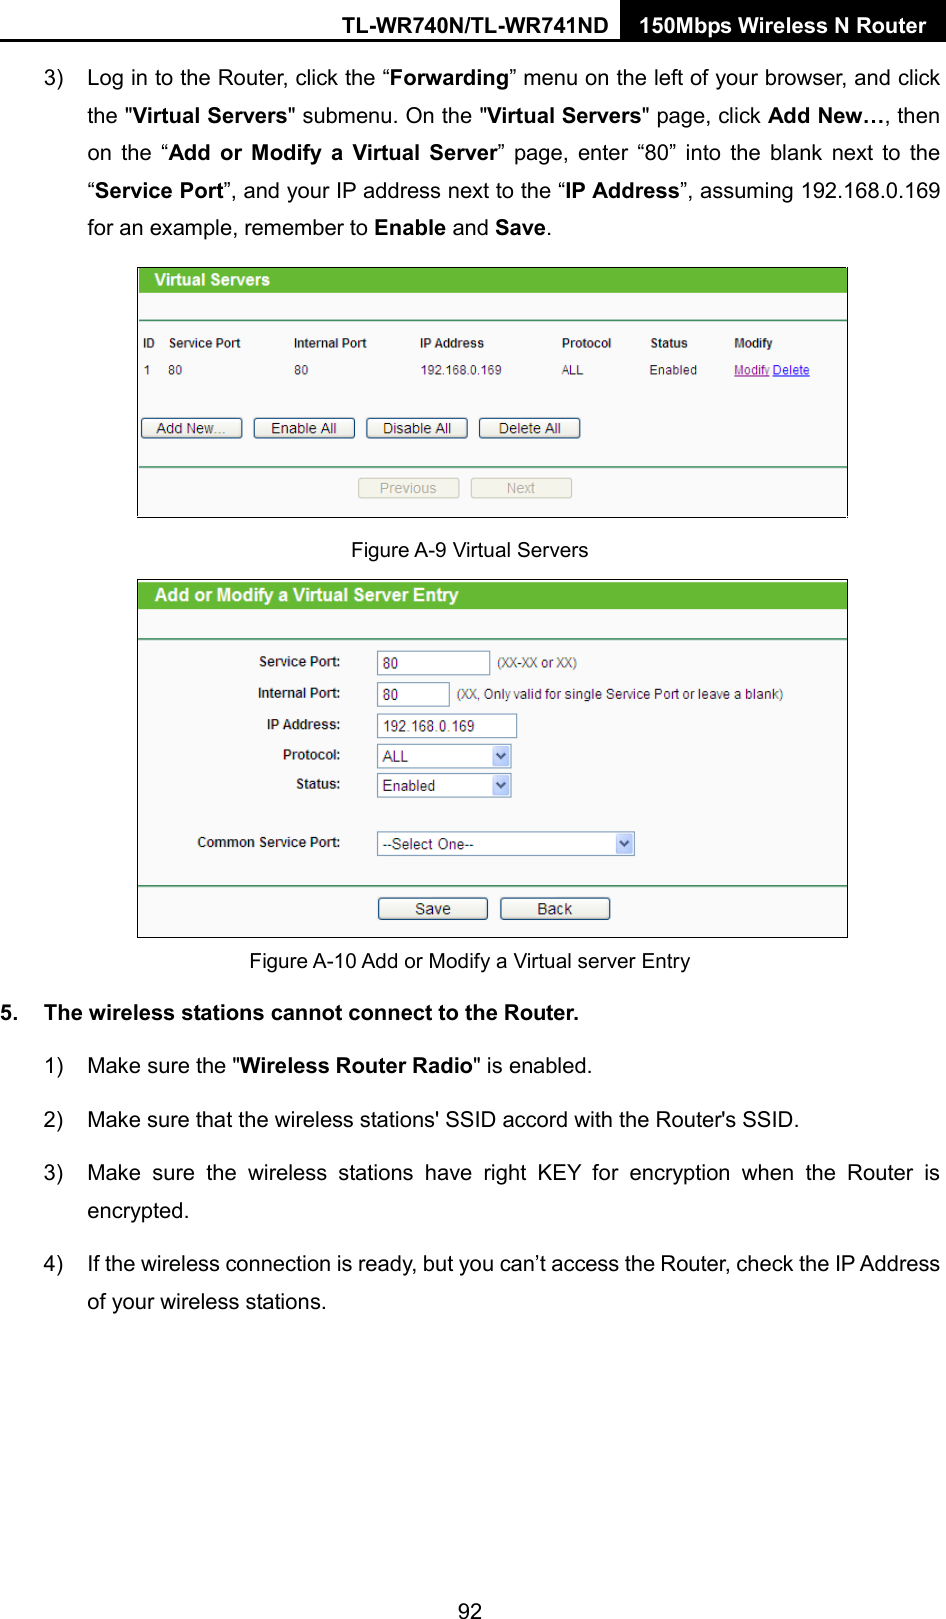 TL-WR740N/TL-WR741ND 150Mbps Wireless N Router  3) Log in to the Router, click the “Forwarding” menu on the left of your browser, and click the &quot;Virtual Servers&quot; submenu. On the &quot;Virtual Servers&quot; page, click Add New…, then on the “Add or Modify a Virtual Server” page, enter “80” into the blank next to the “Service Port”, and your IP address next to the “IP Address”, assuming 192.168.0.169 for an example, remember to Enable and Save.  Figure A-9 Virtual Servers  Figure A-10 Add or Modify a Virtual server Entry 5. The wireless stations cannot connect to the Router. 1) Make sure the &quot;Wireless Router Radio&quot; is enabled. 2) Make sure that the wireless stations&apos; SSID accord with the Router&apos;s SSID. 3) Make sure the wireless stations have right KEY for encryption when the Router is encrypted. 4) If the wireless connection is ready, but you can’t access the Router, check the IP Address of your wireless stations. 92 